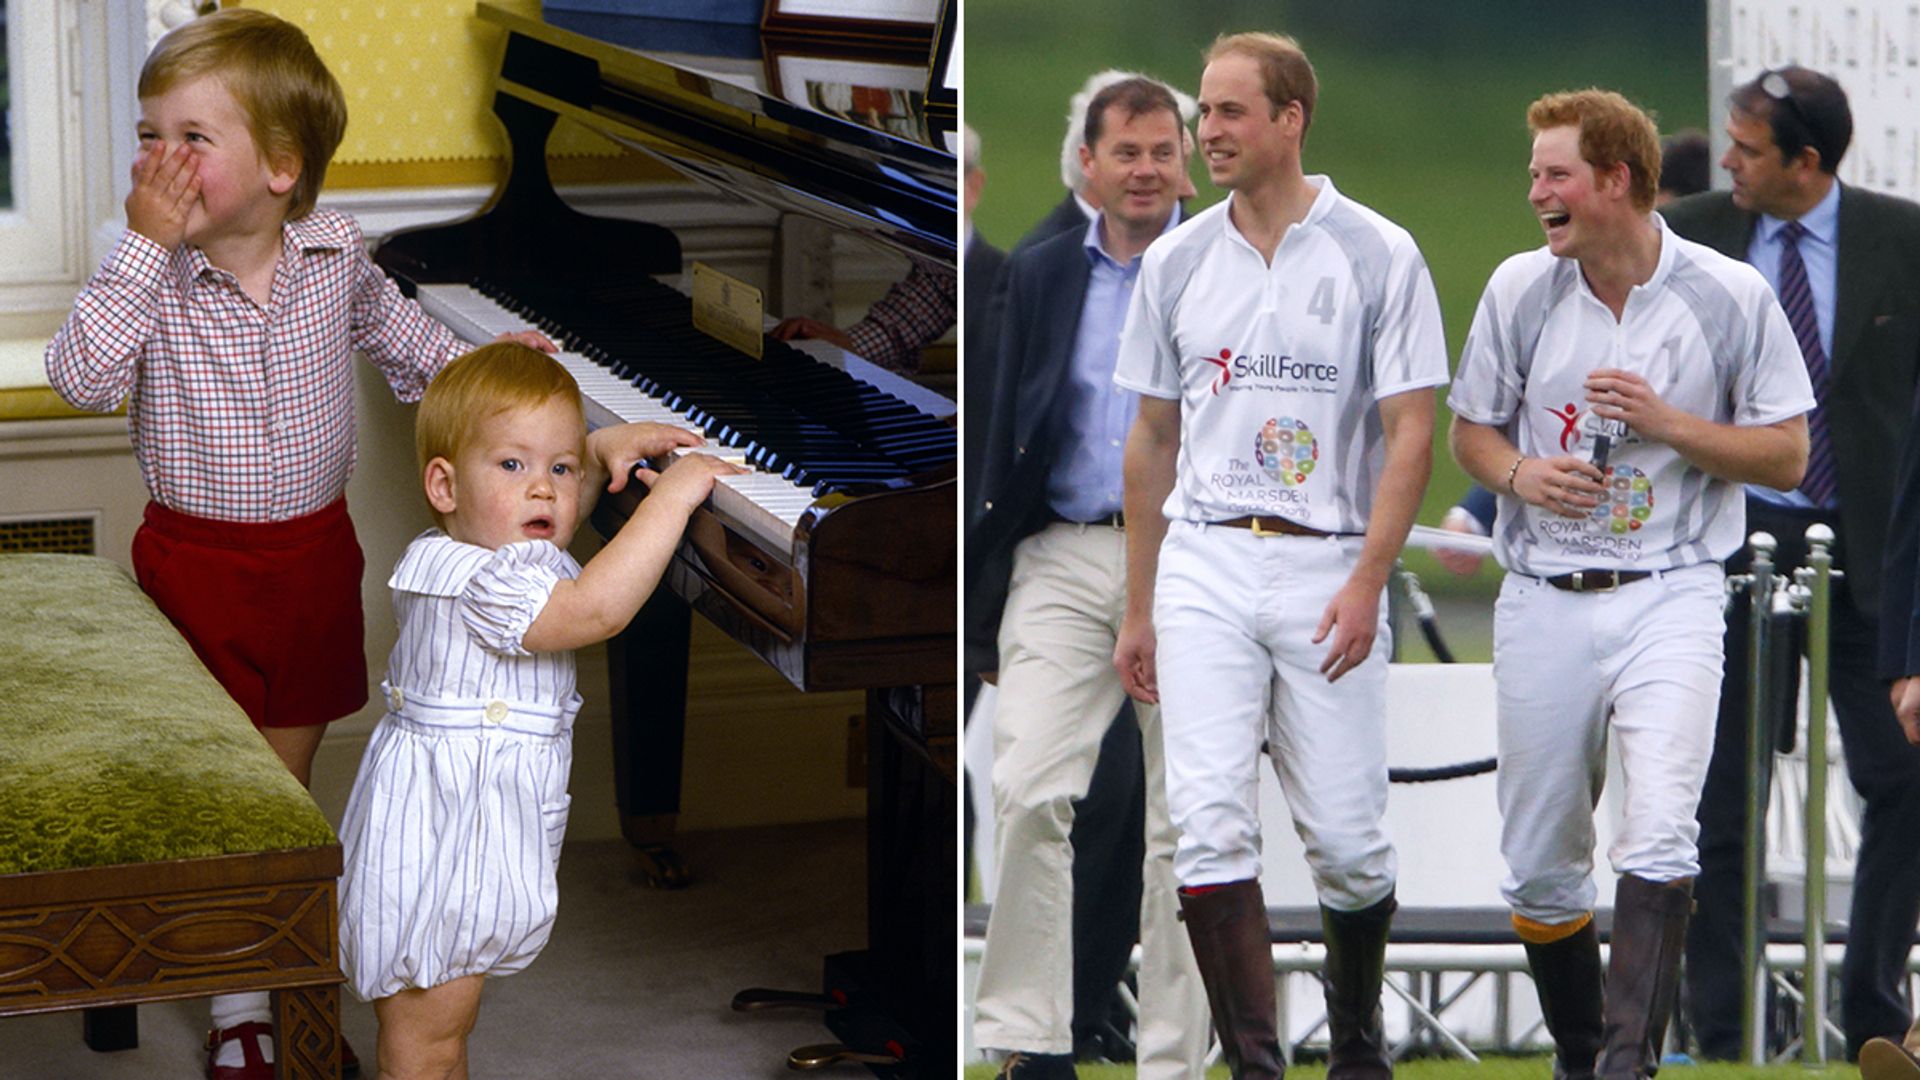 Split image of William and Harry as childre nand the pair walking together at a polo match